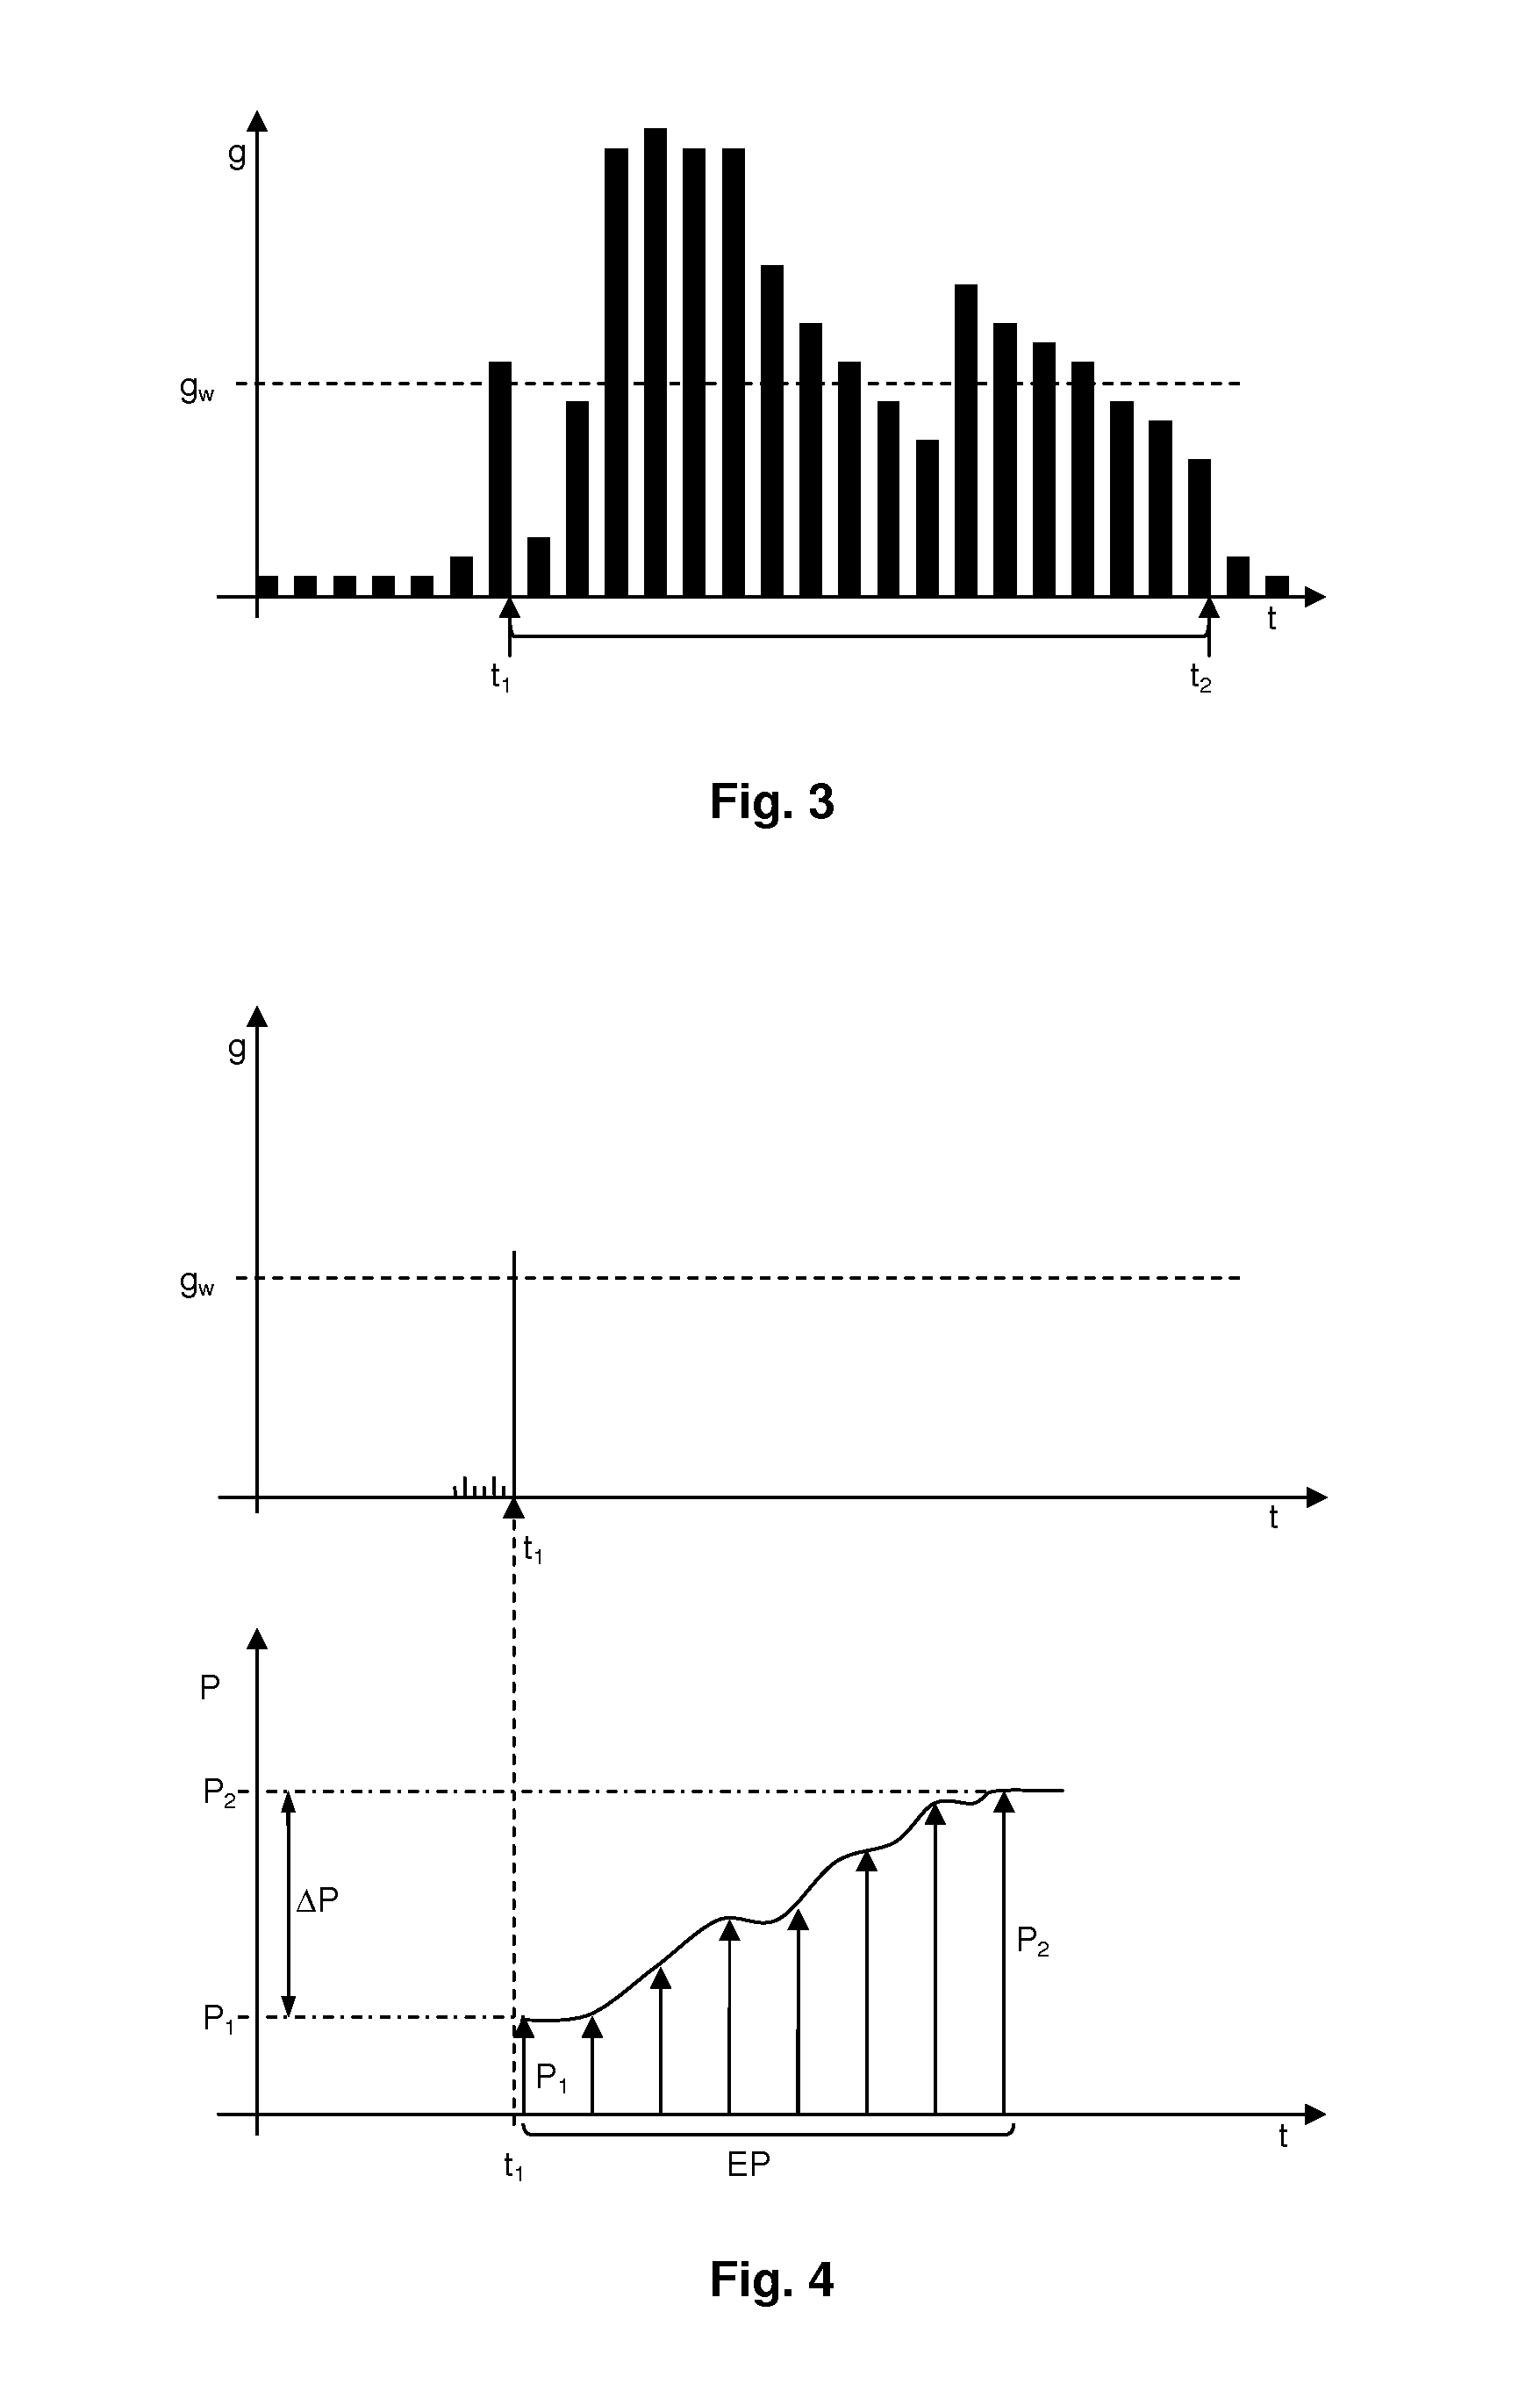 Fall Detector and Method of Determining a Fall in a Social Alarm System